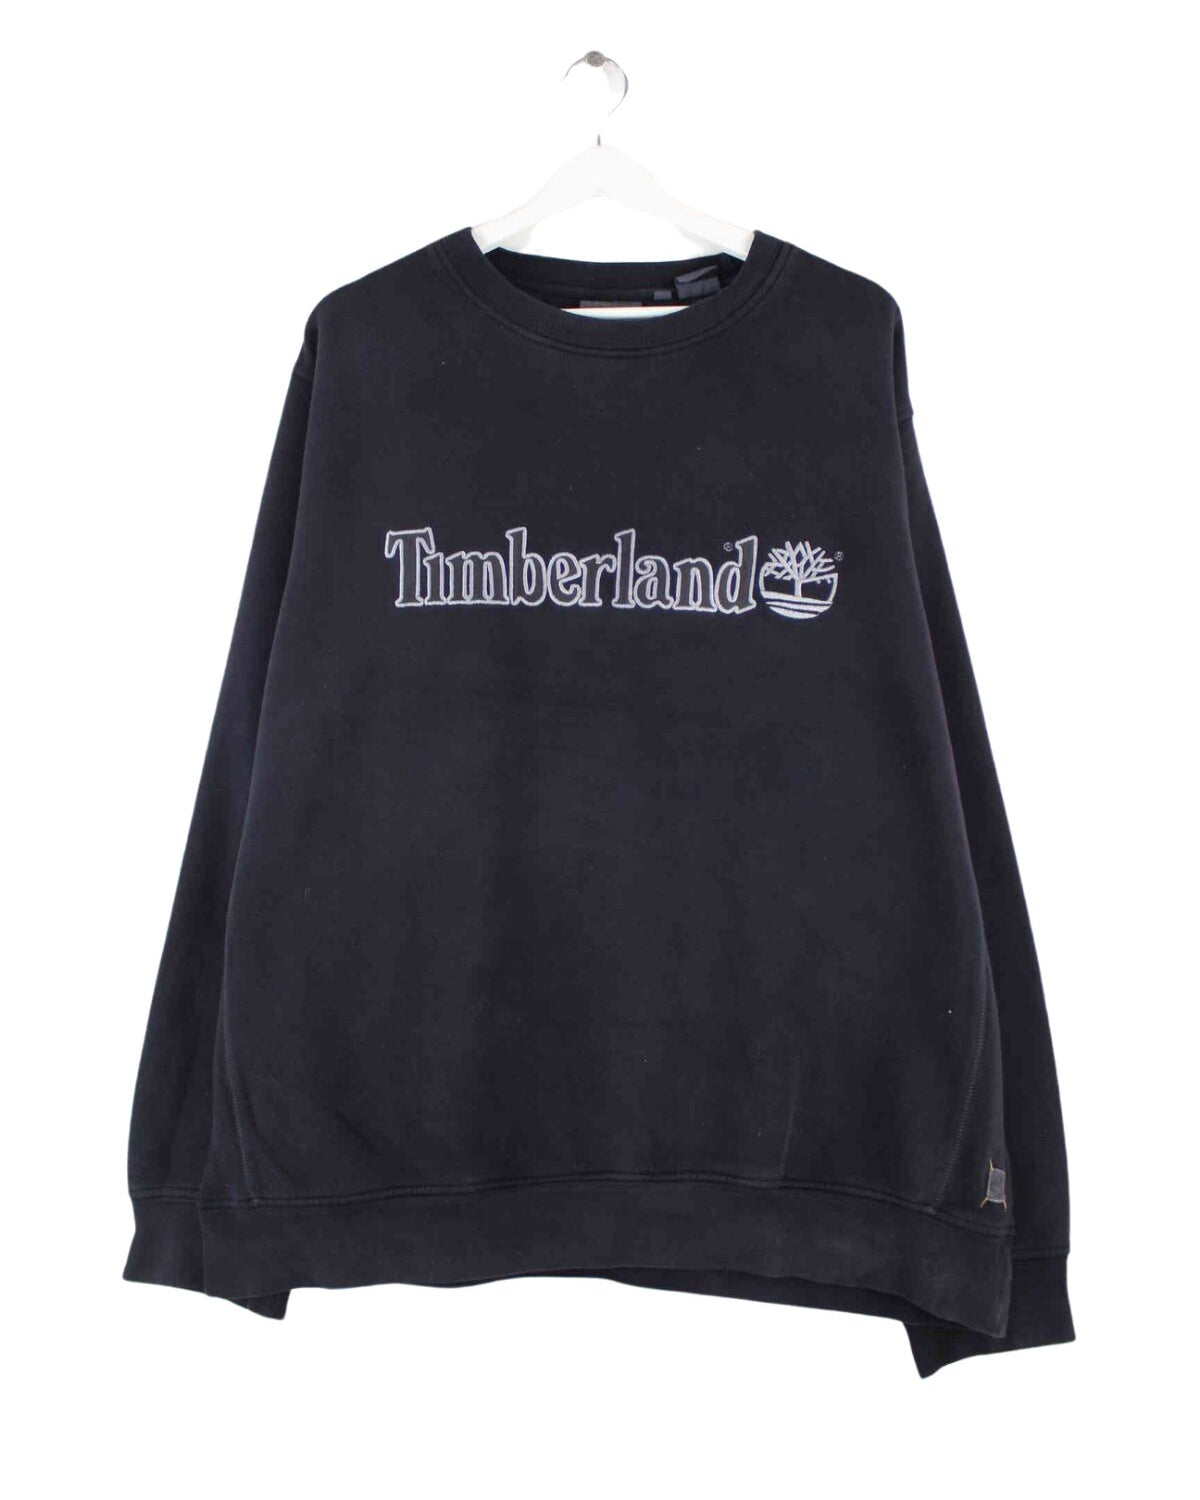 Timberland Logo Embroidered Sweater Schwarz XL (front image)